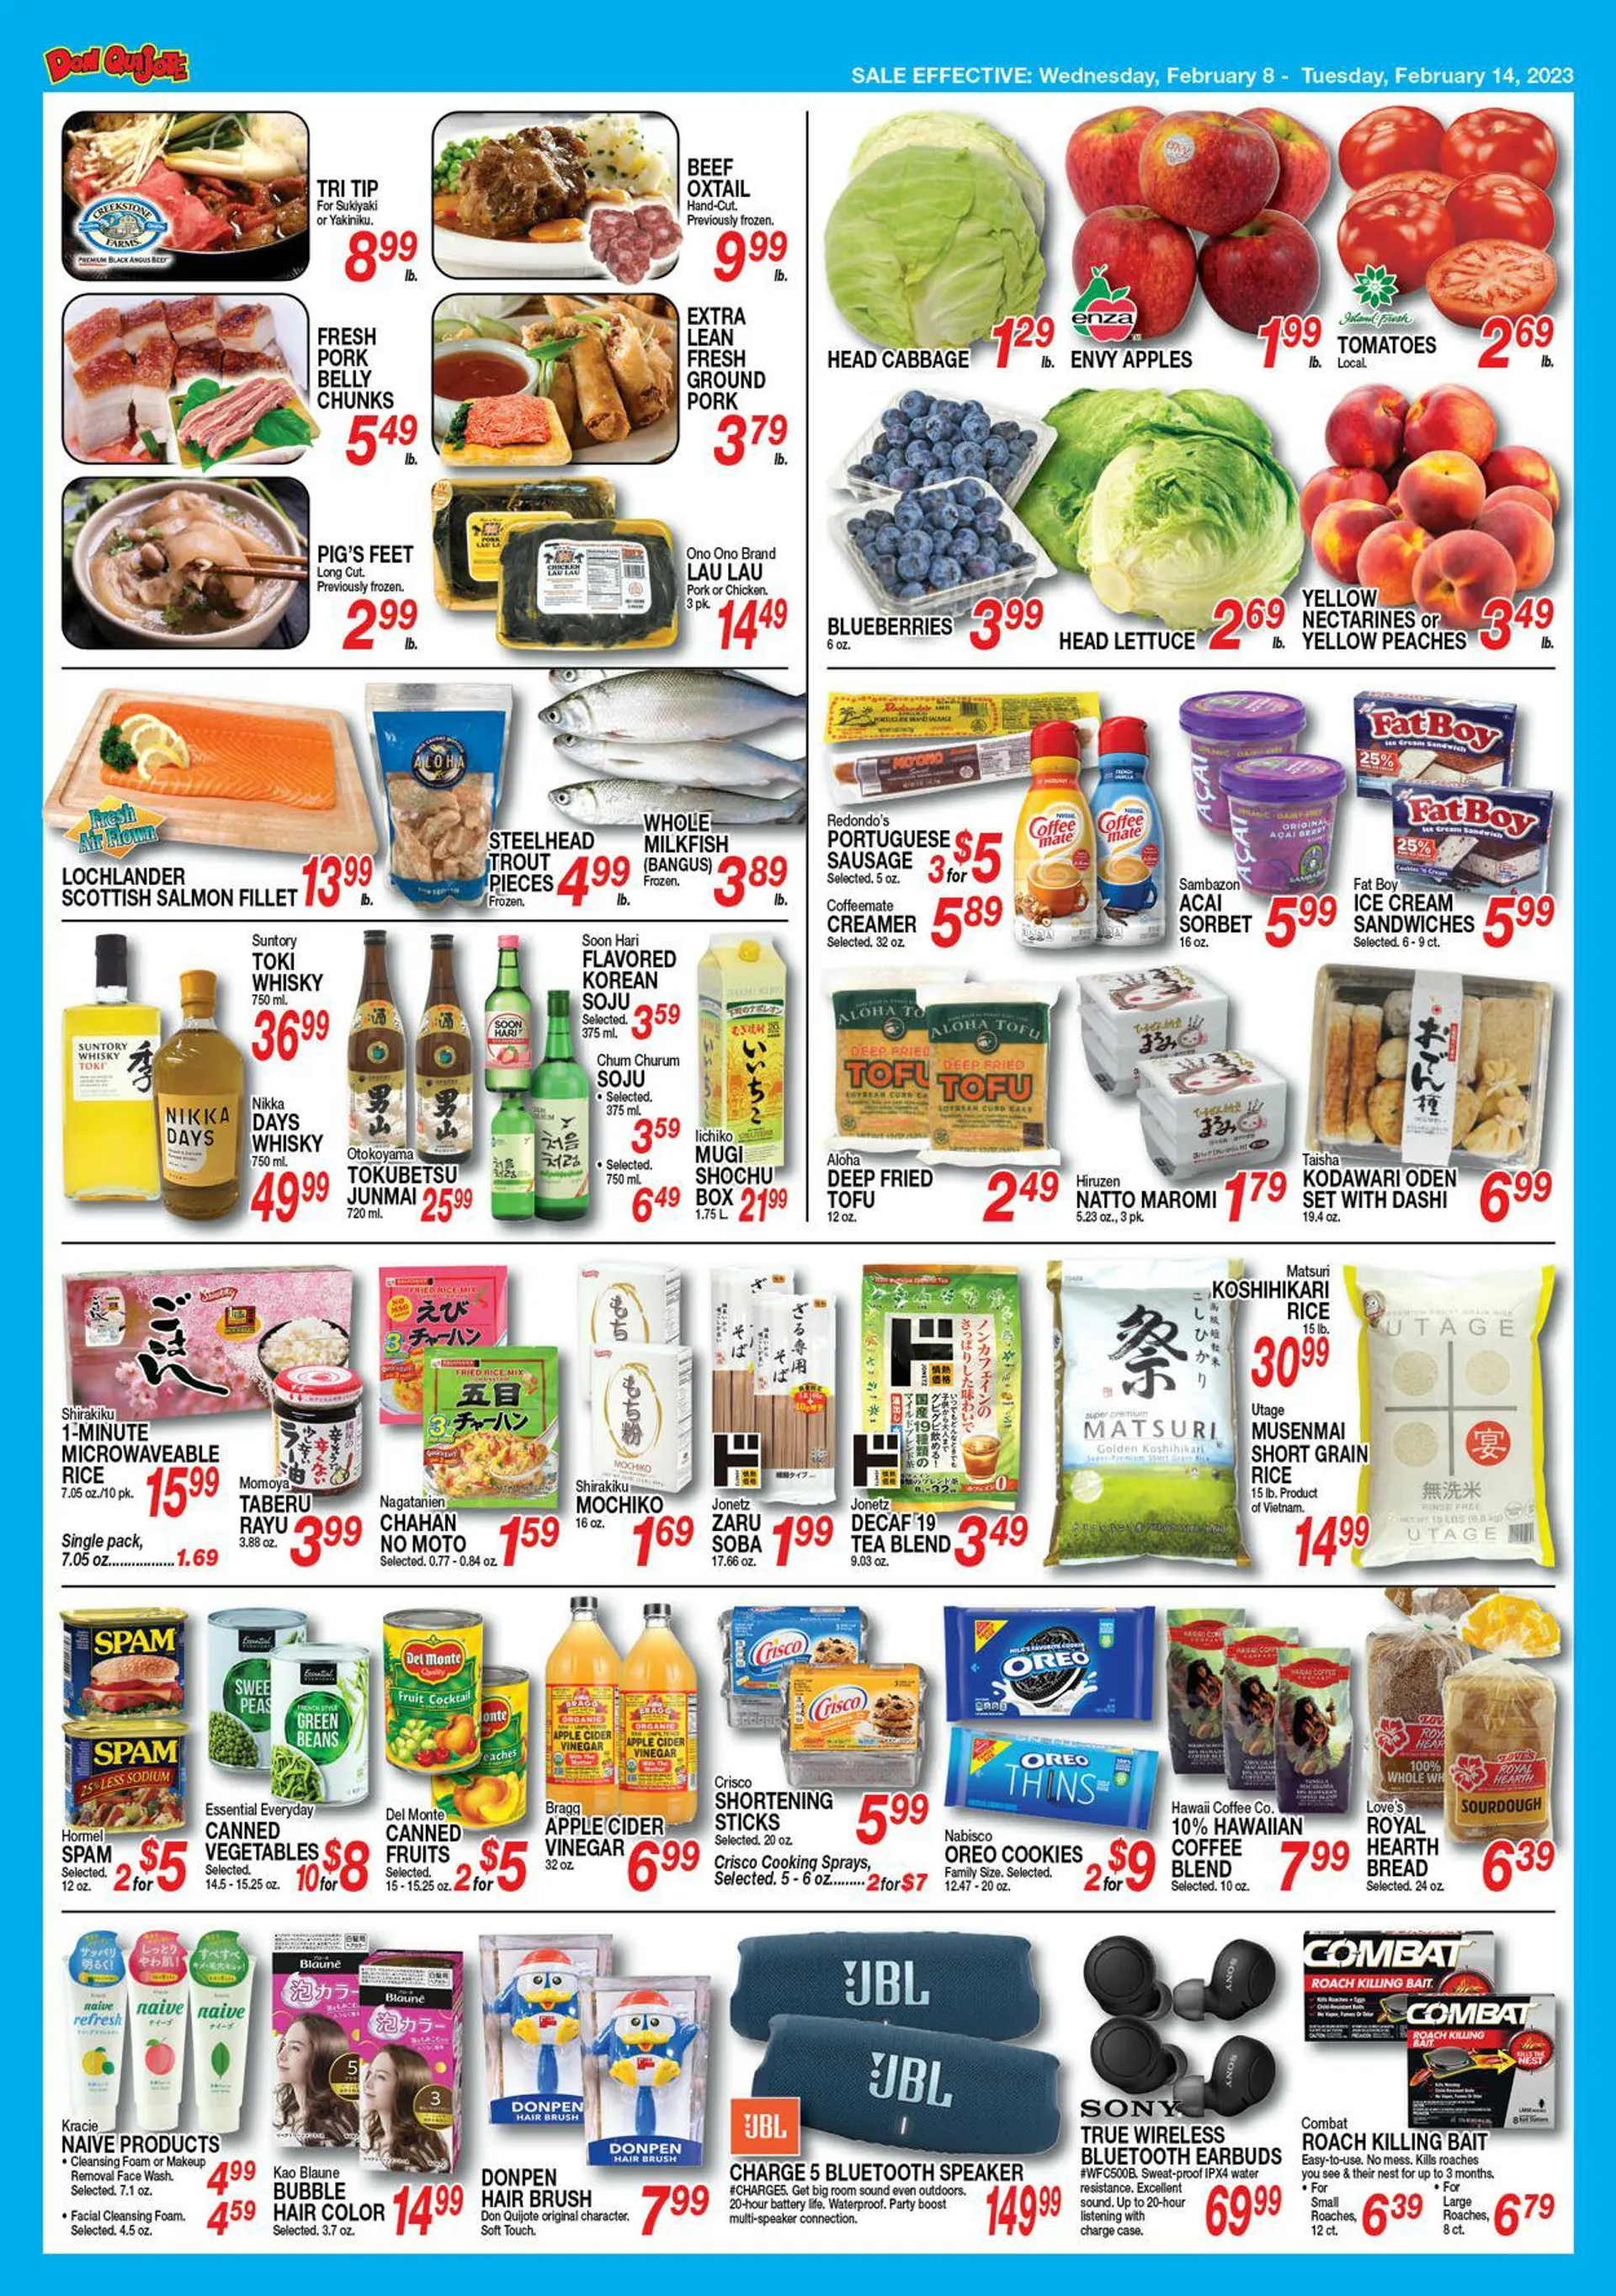 Don Quijote Hawaii Current weekly ad - 6